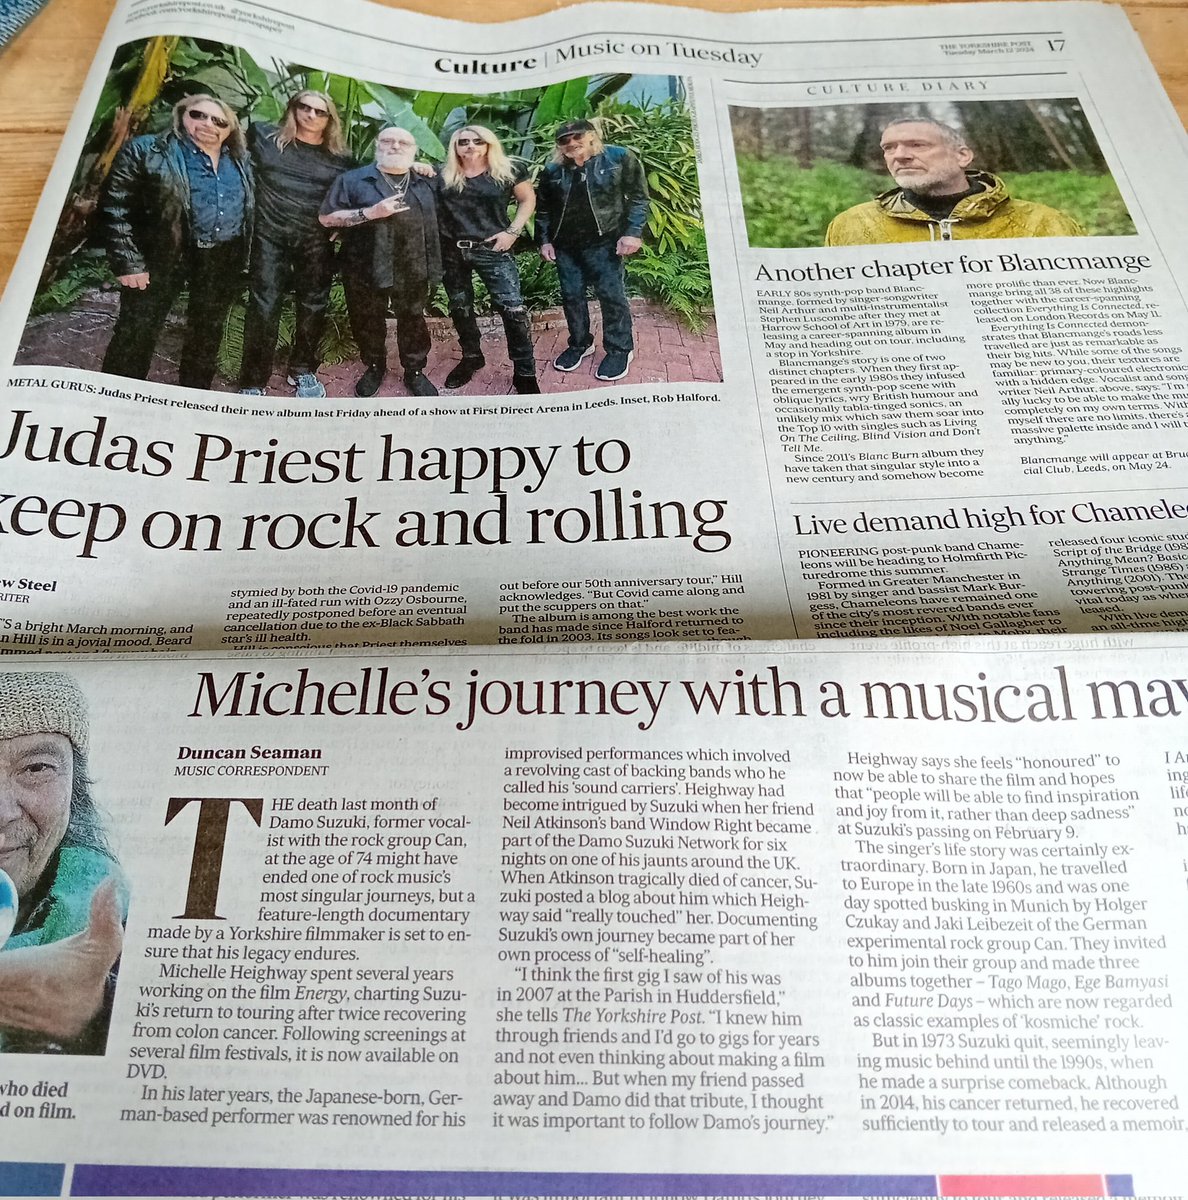 A musical two-for in today's @yorkshirepost - @judaspriest talk to @andrewsteel52, and I speak to @i4visuals about @energythefilm, now out on DVD. #damosuzuki If you can, please ##buyapaper